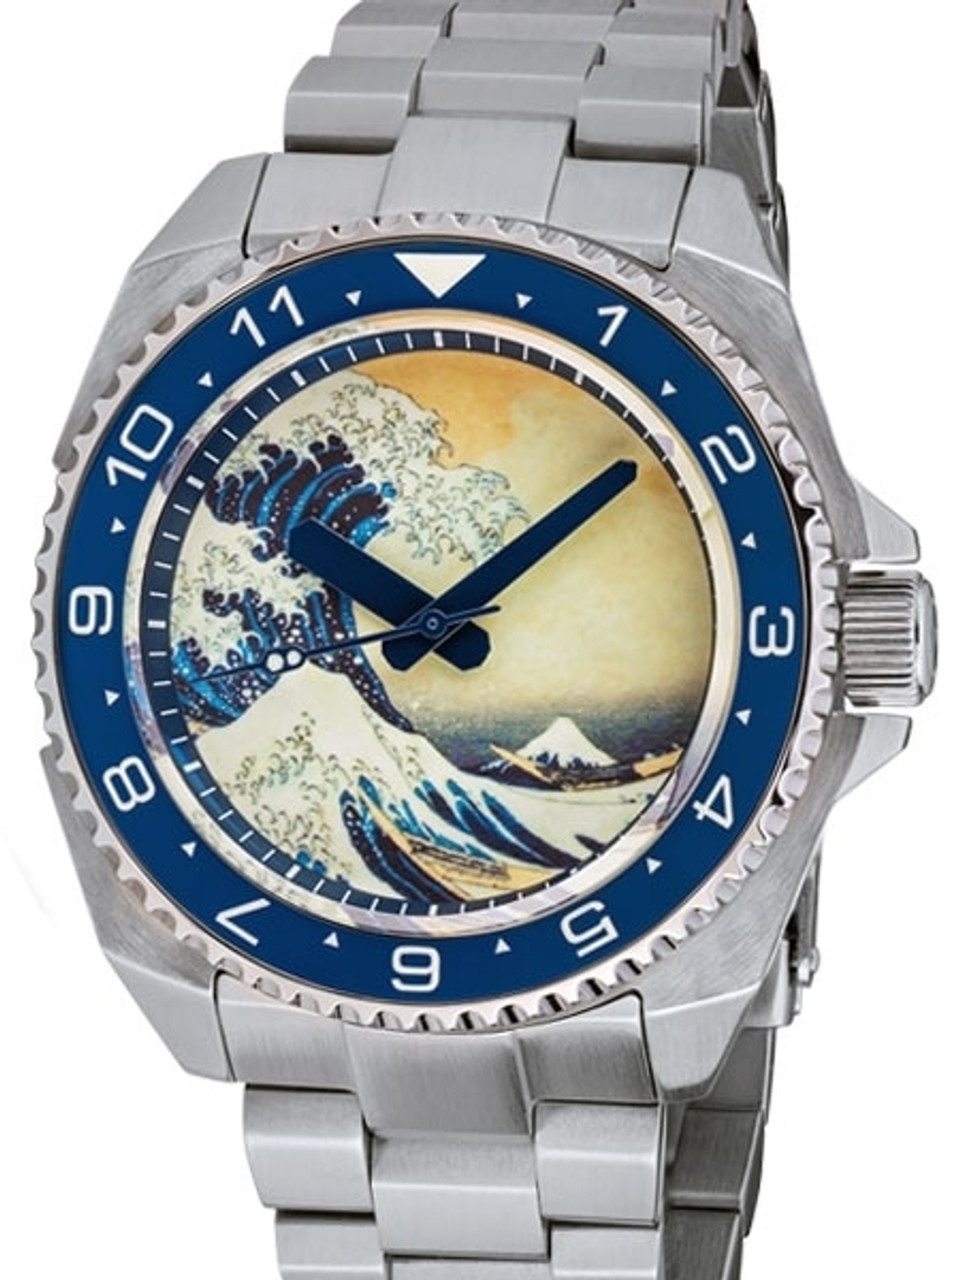 Ulysse Nardin Diver Chronometer One More Wave Watch Review